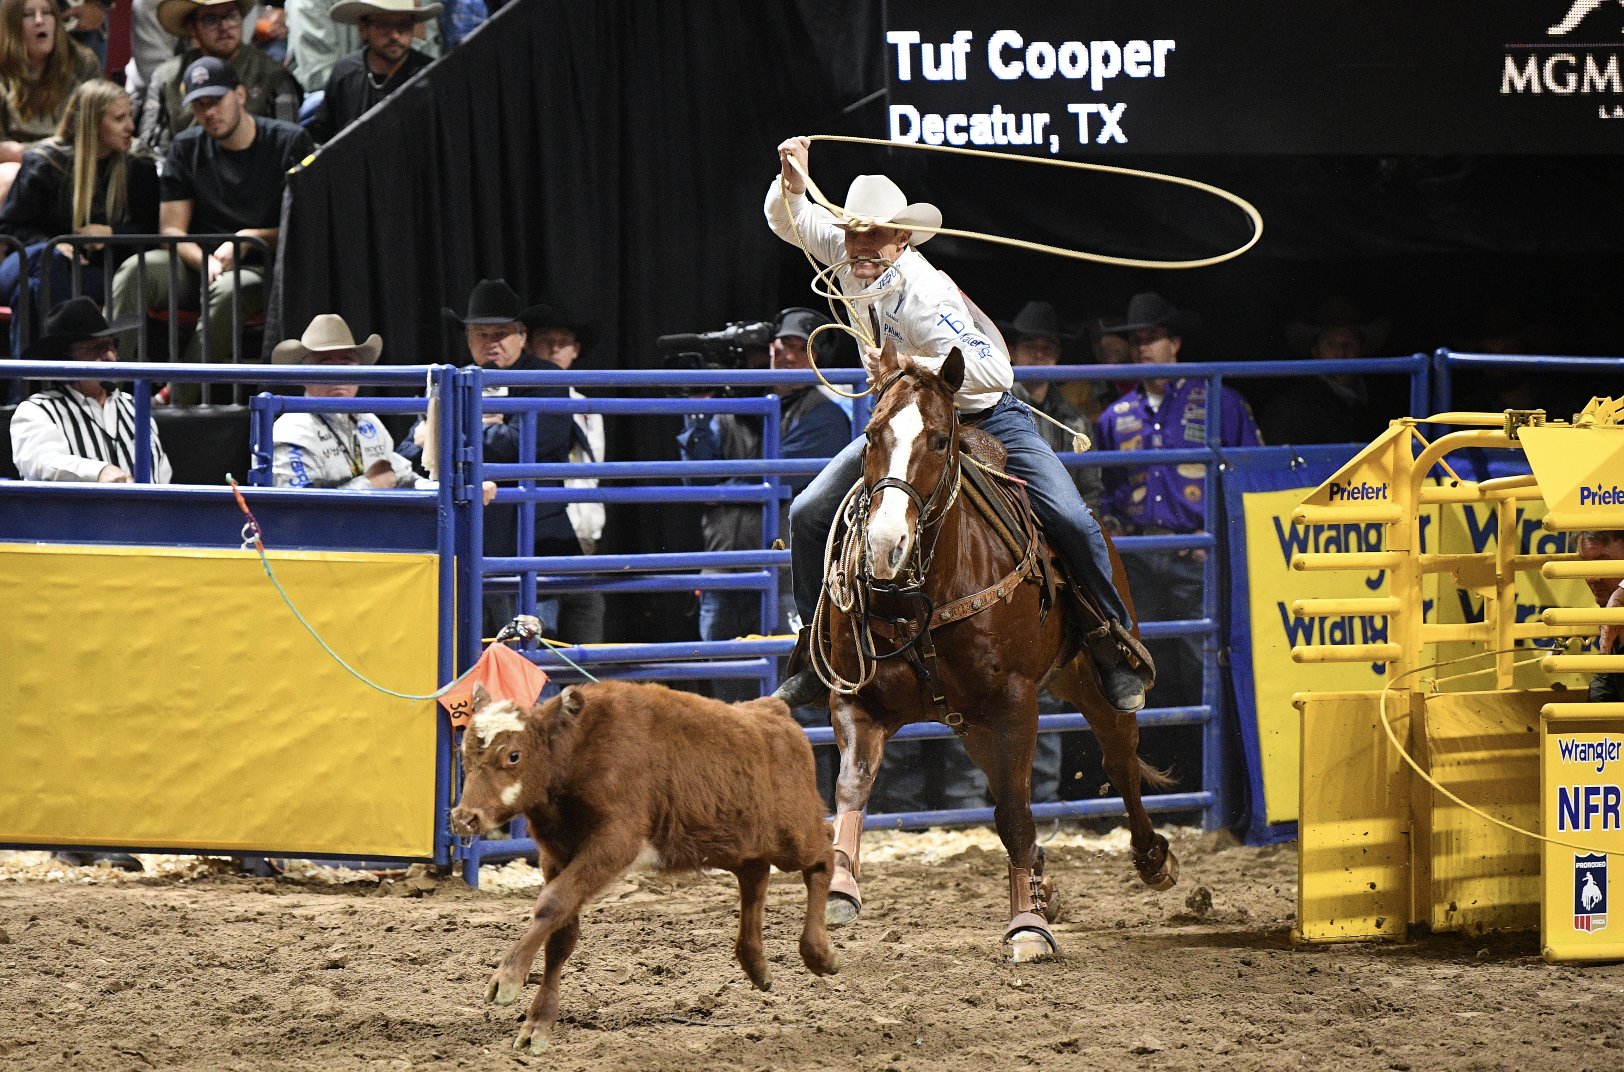 Tuf Cooper goes 7.2 seconds in Round 6 of the NFR, adding to his bankroll.